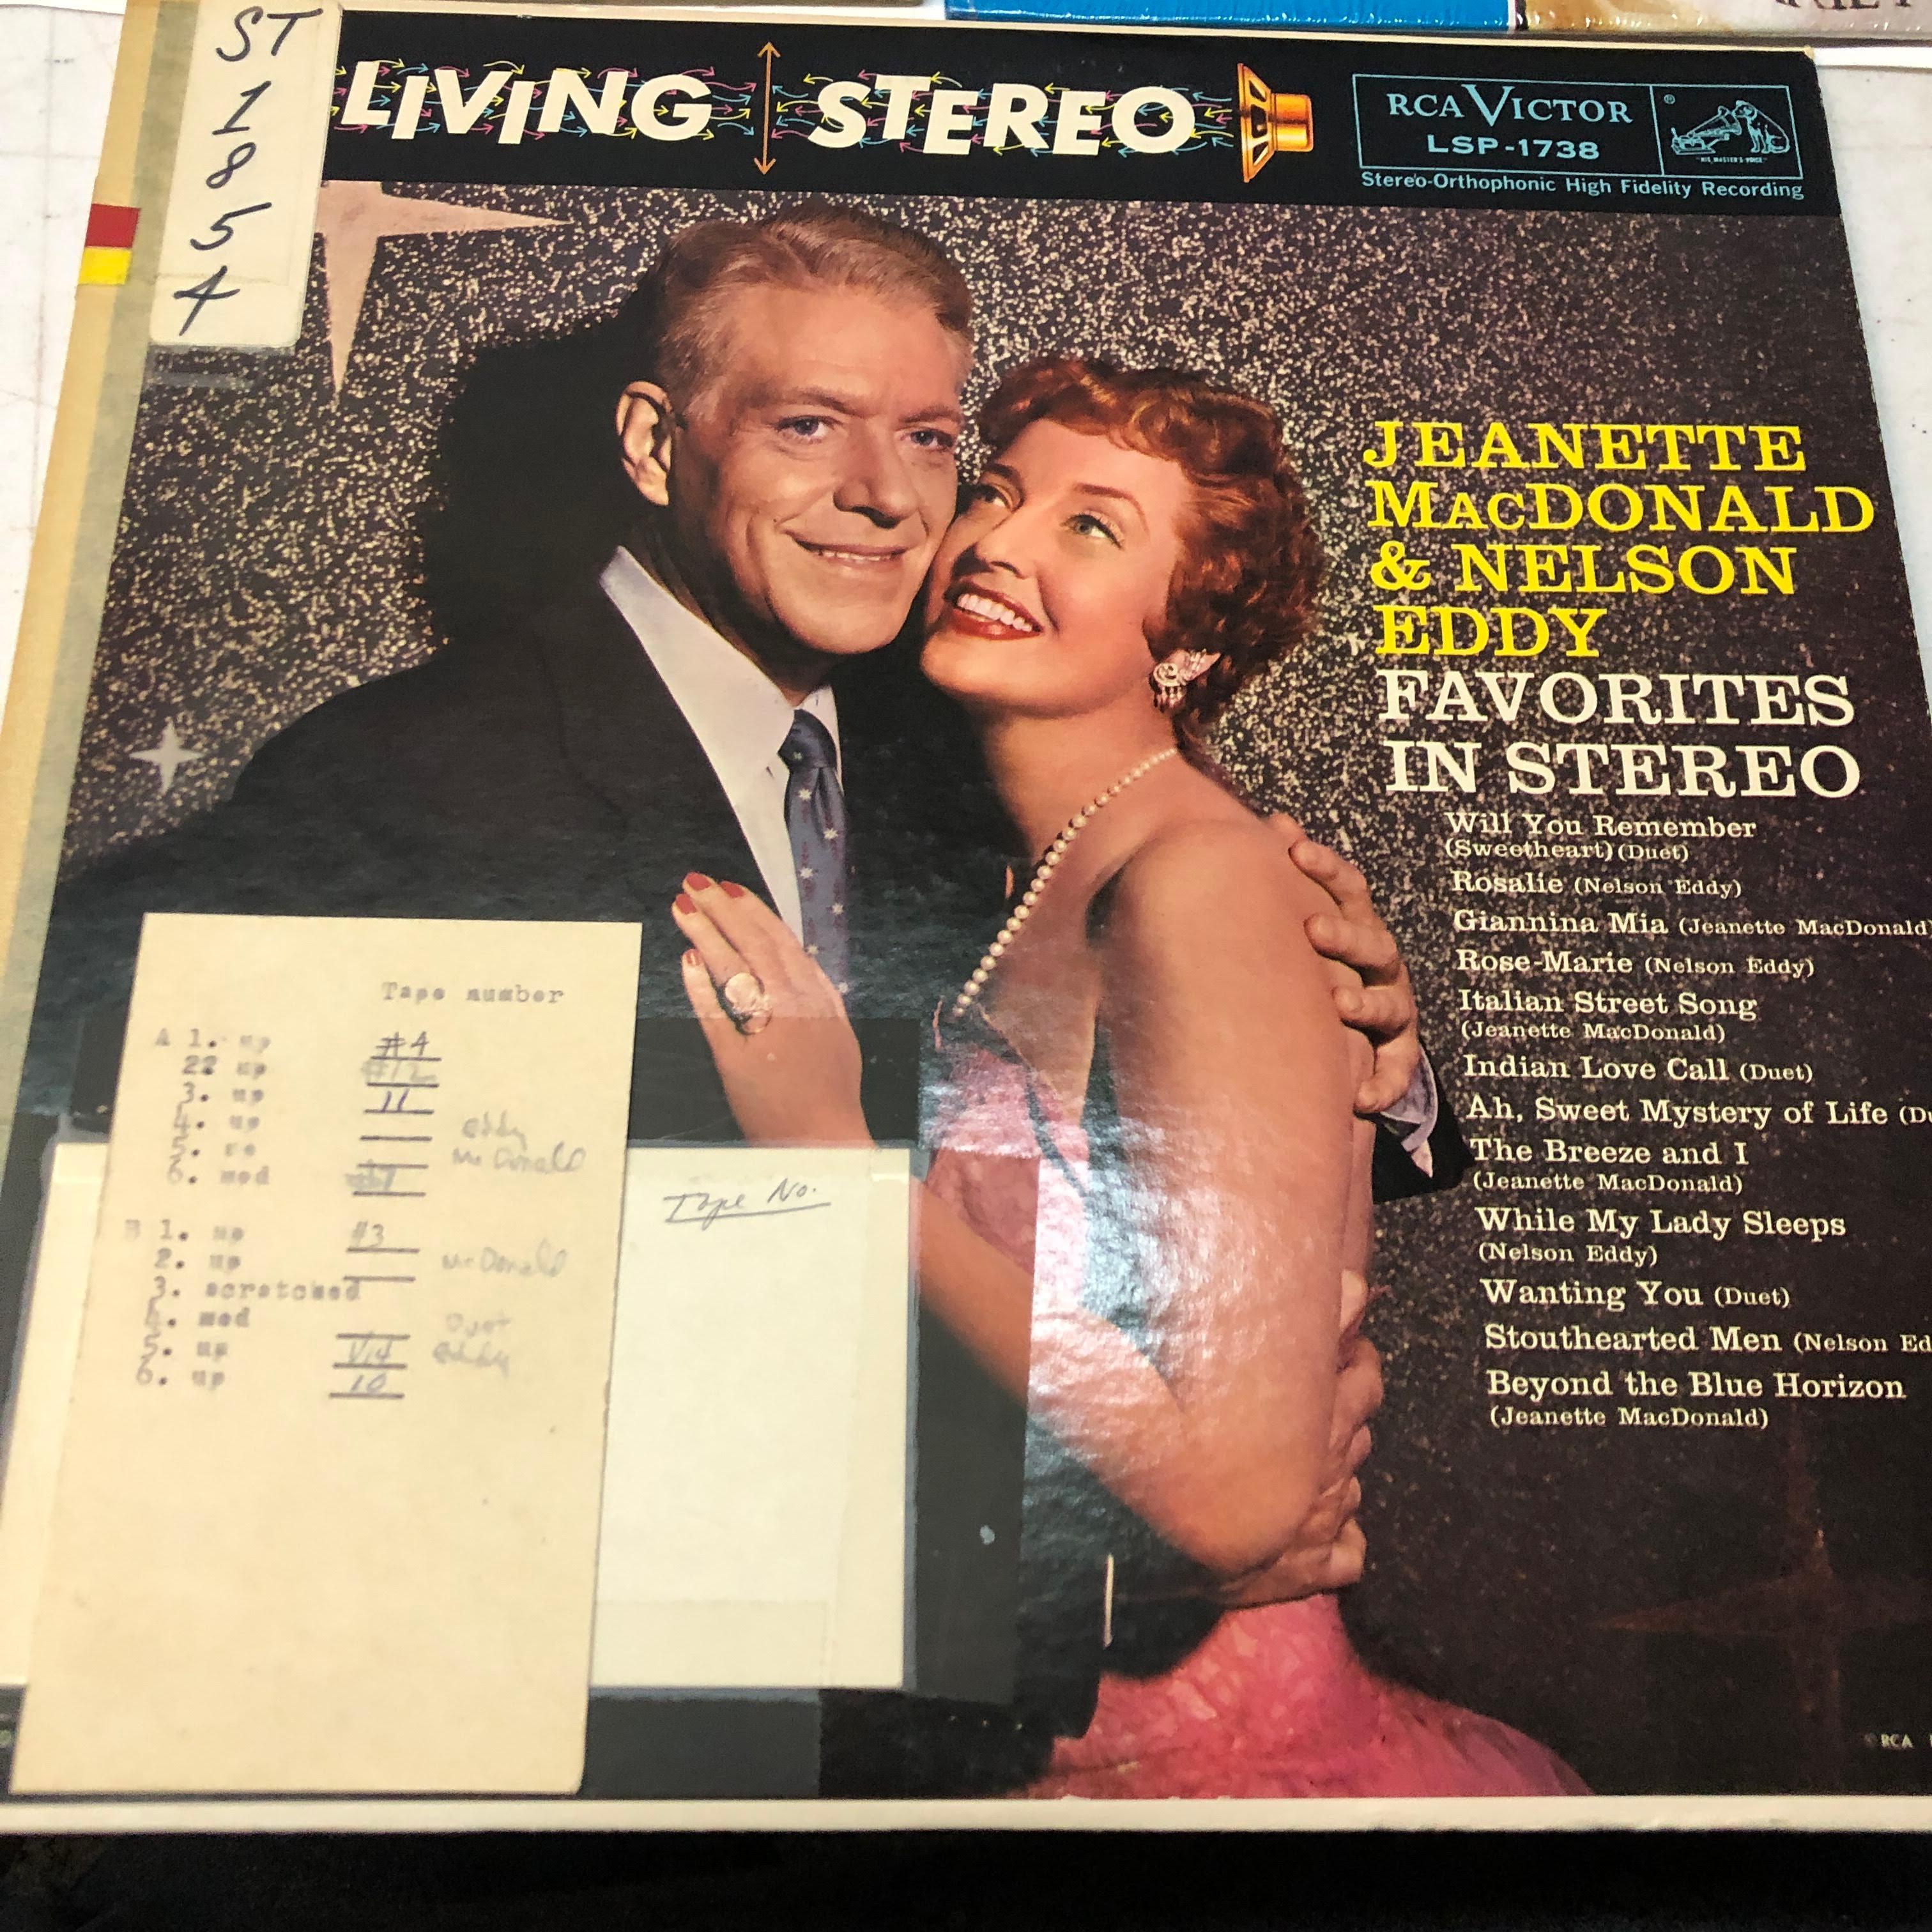 Favorites in Stereo by Jeanette MacDonald and Nelson Eddy and More Record Albums Lot of 5